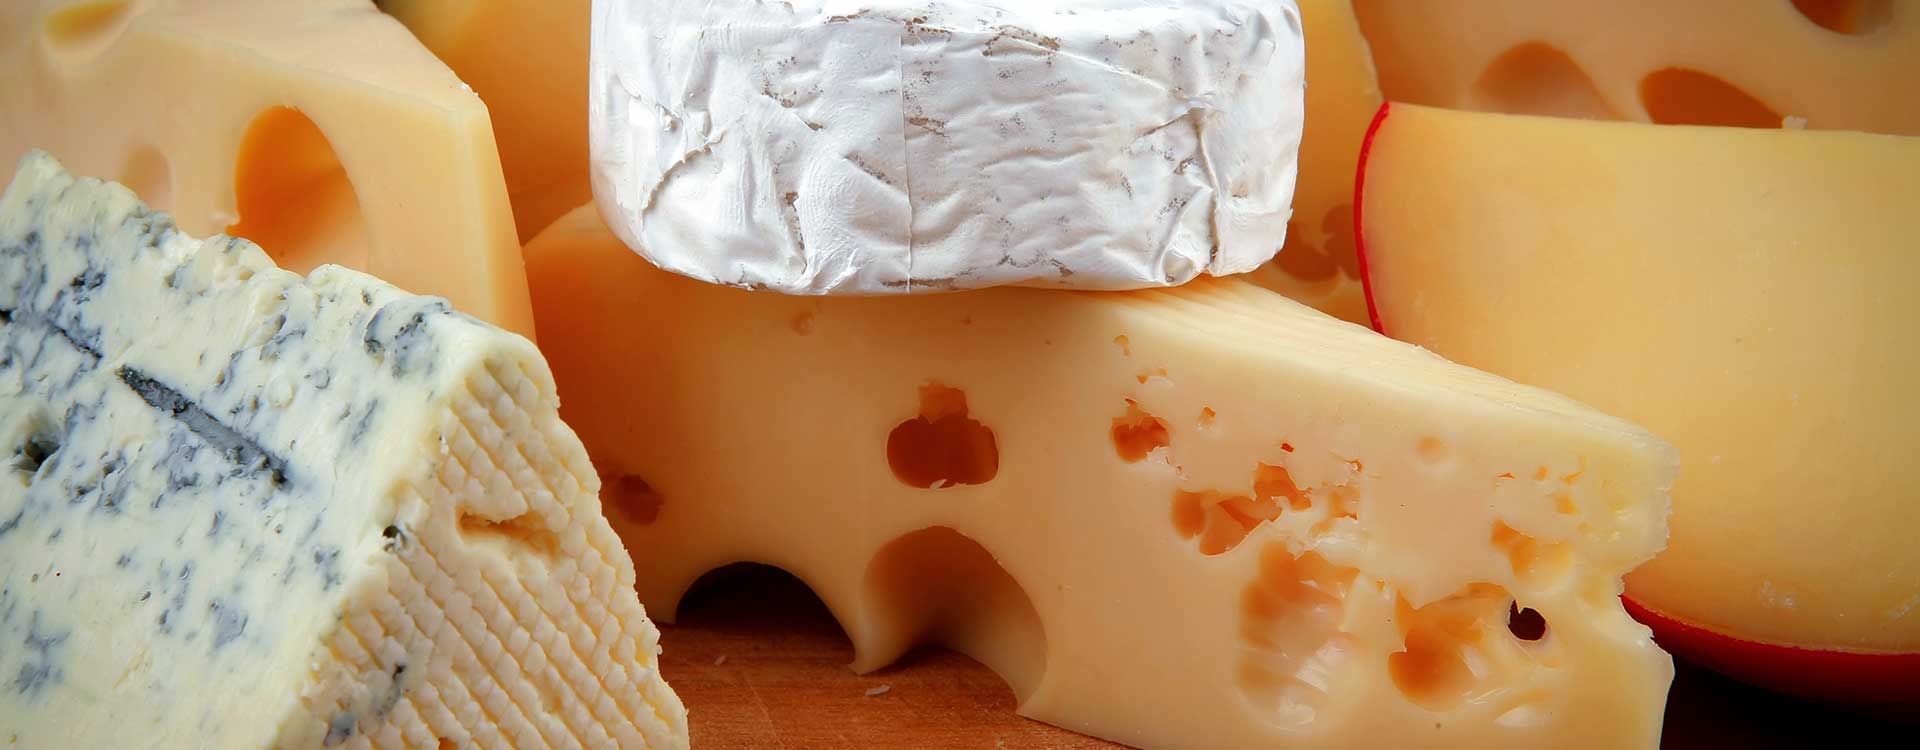 Surface mould-ripened cheeses and washed-rind cheeses: how do they differ from each other?